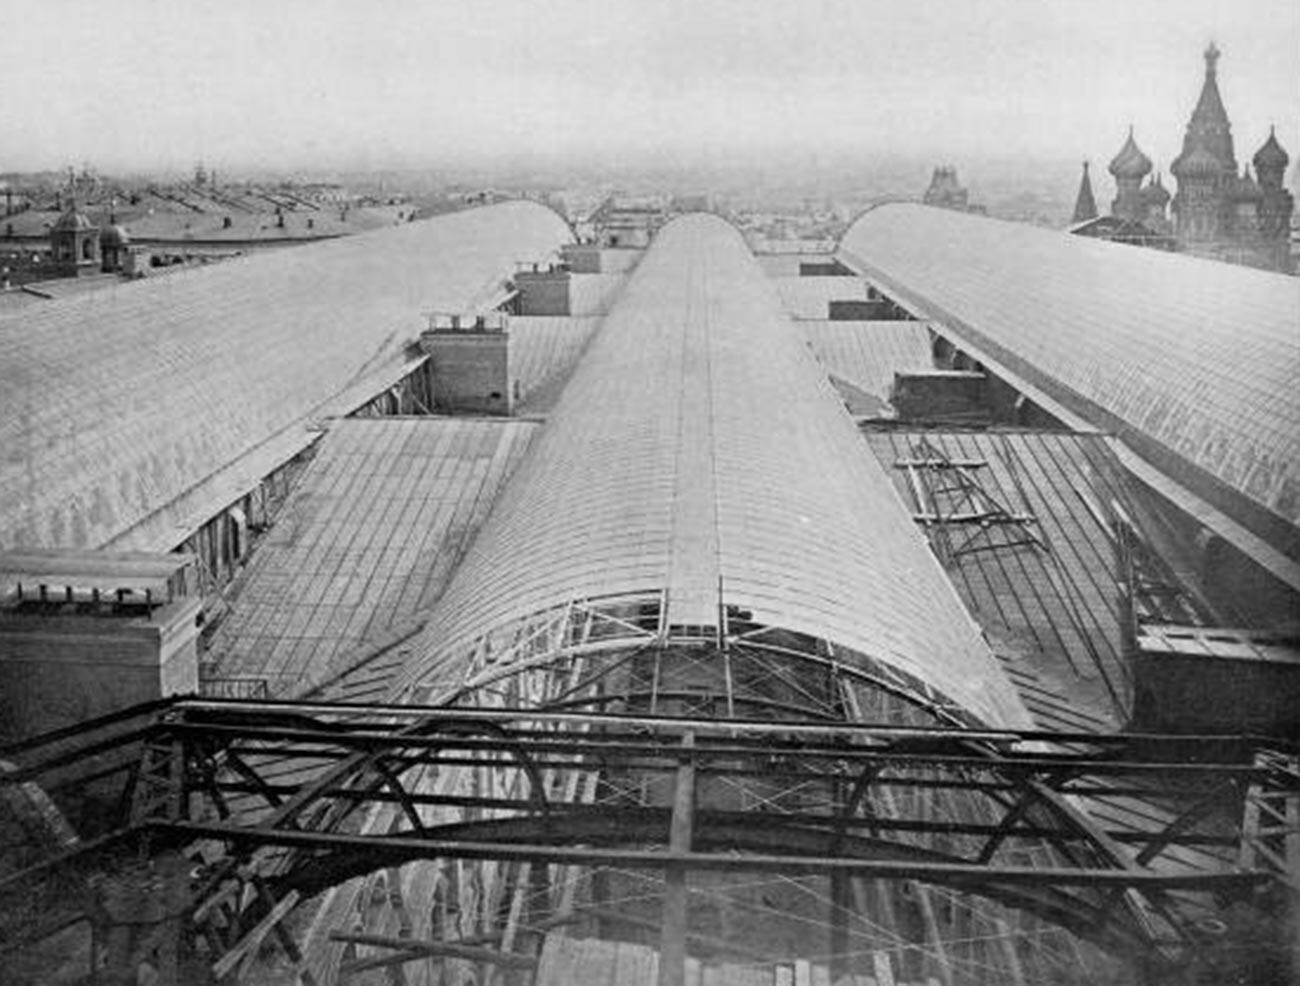 The roof of the Upper Trading Rows in construction.